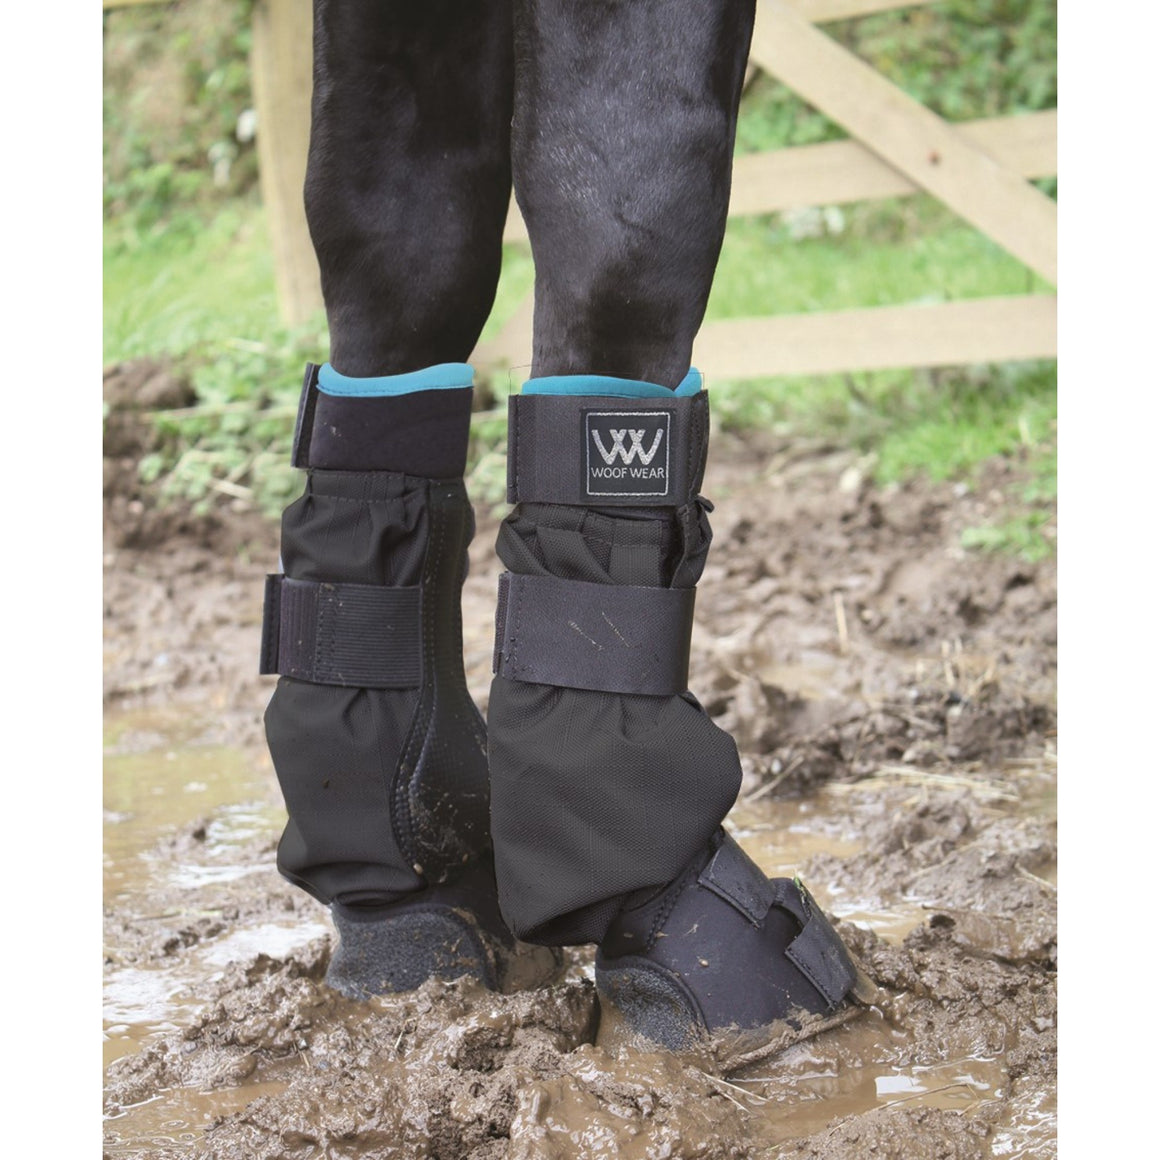 Woof Wear Mud Fever Turnout Boot